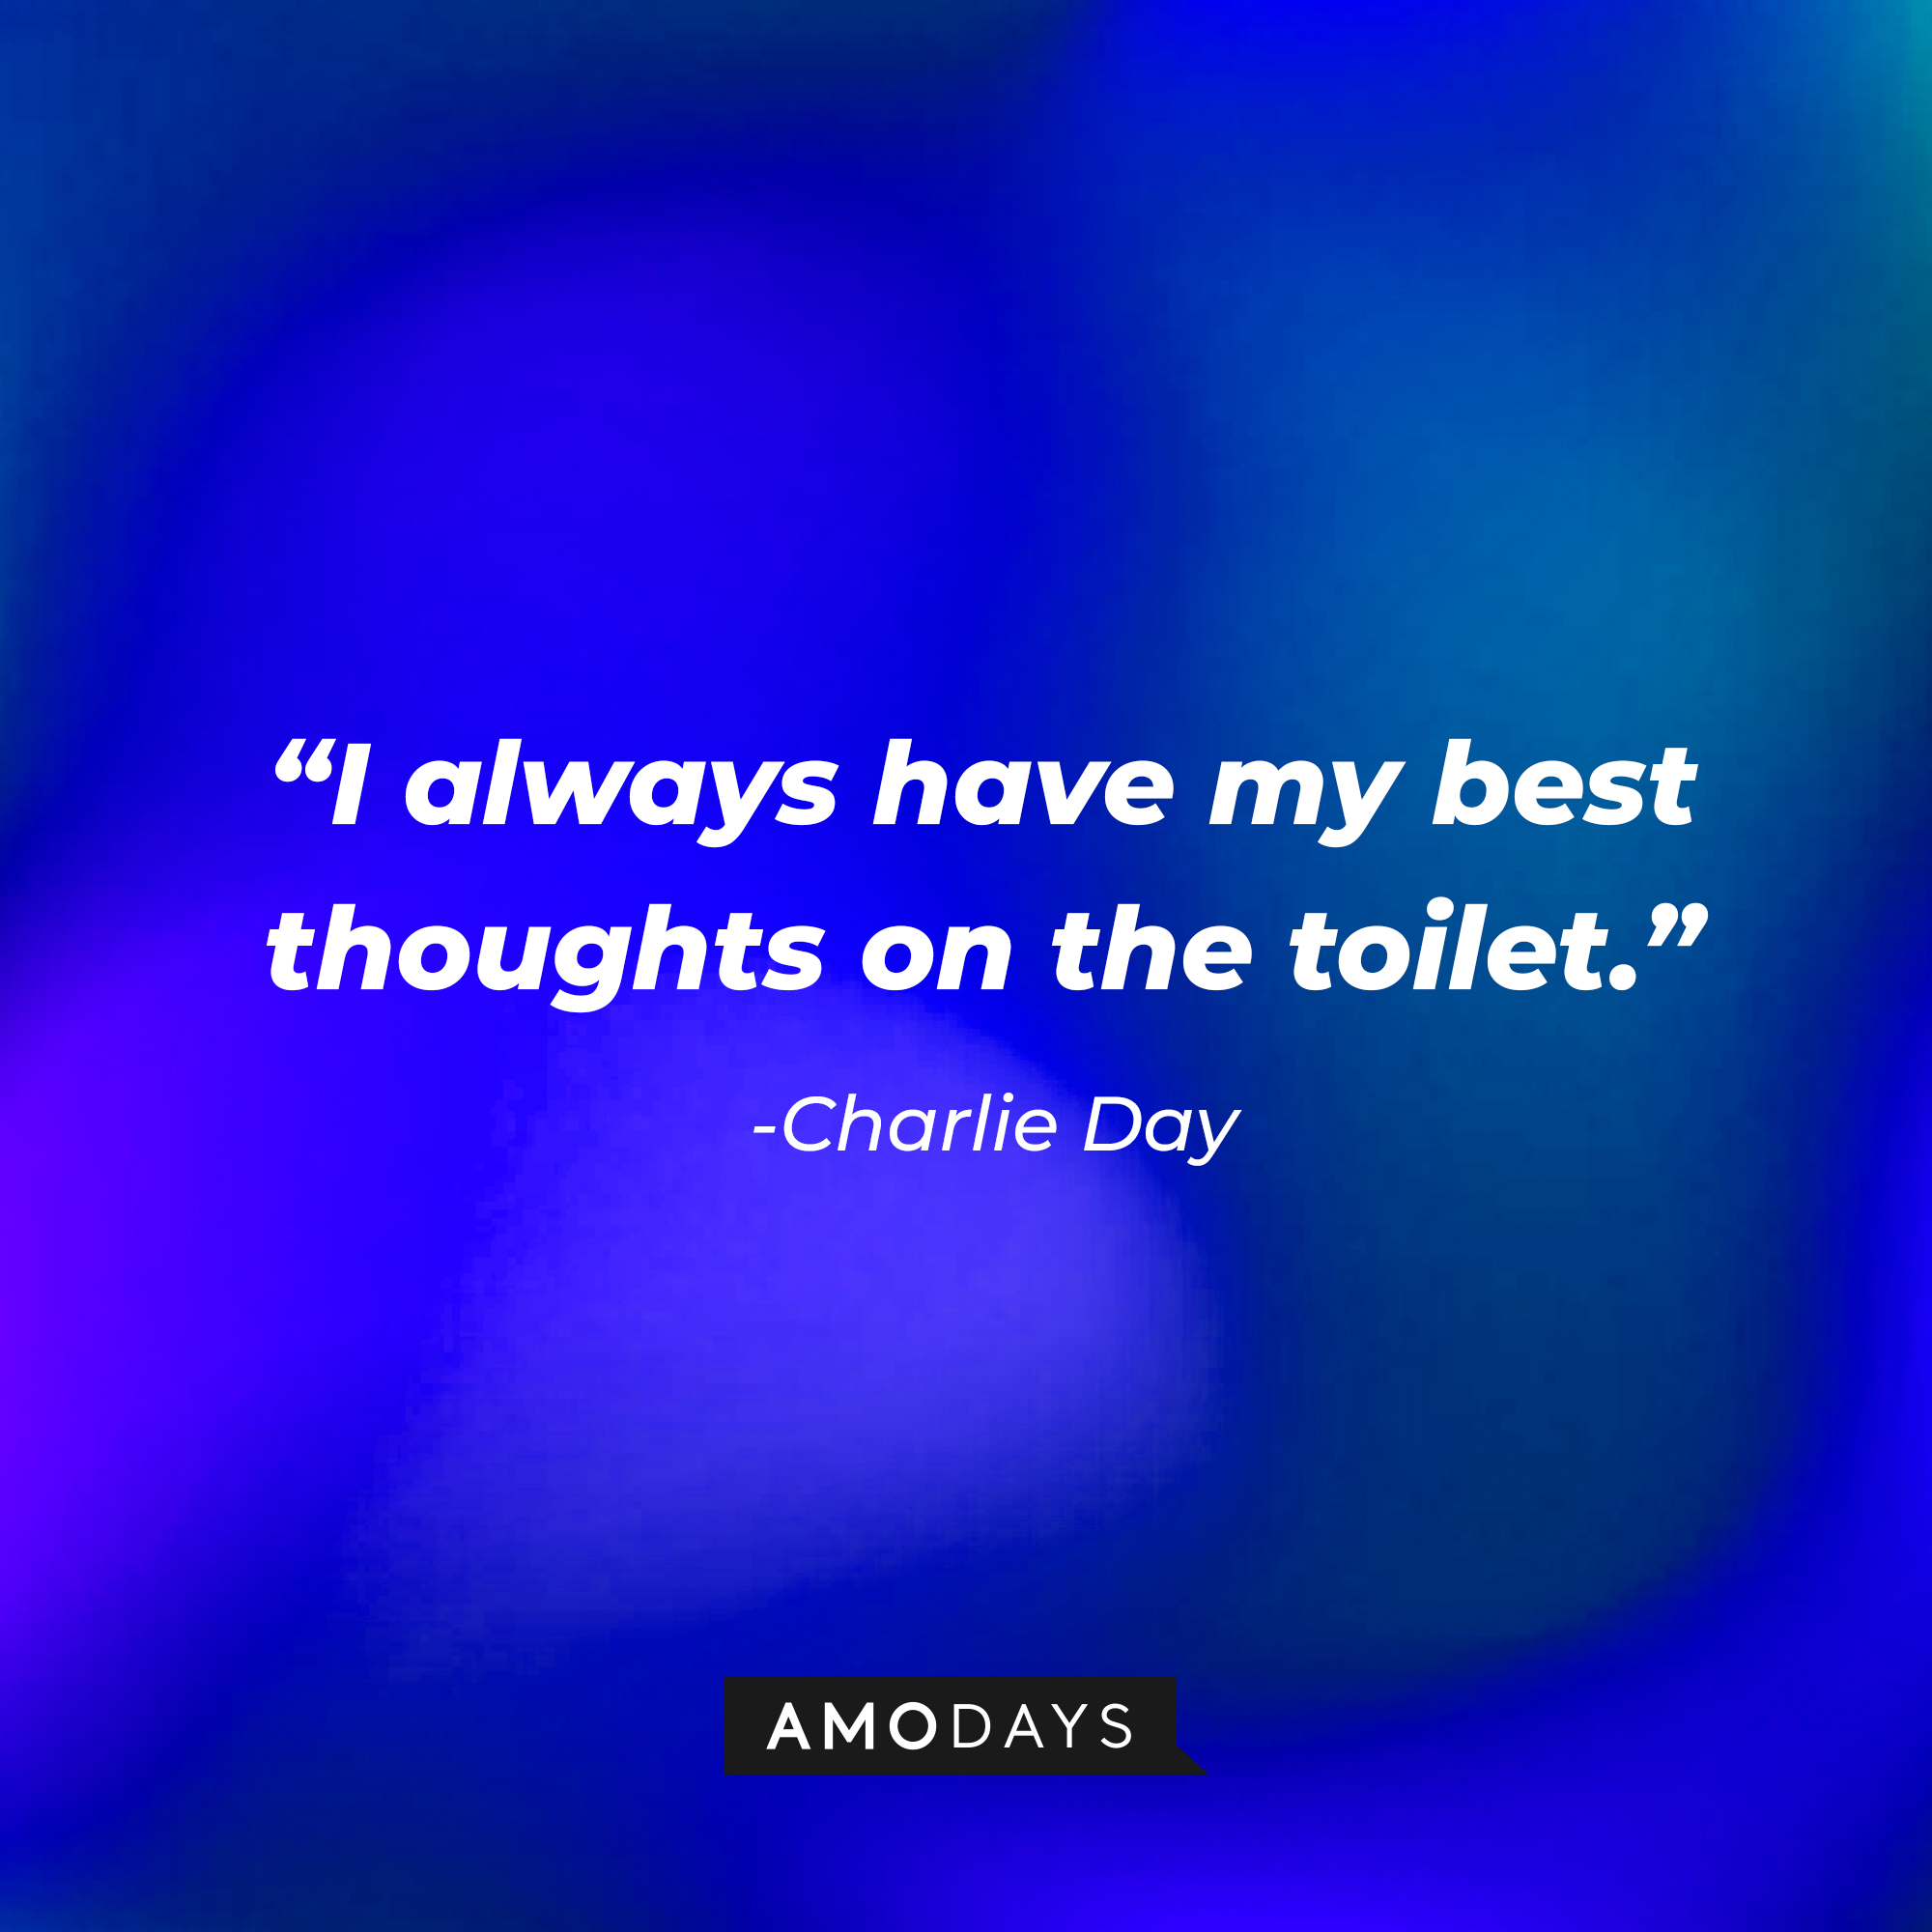 Charlie Day’s quote: “I always have my best thoughts on the toilet.” | Source: AmoDays